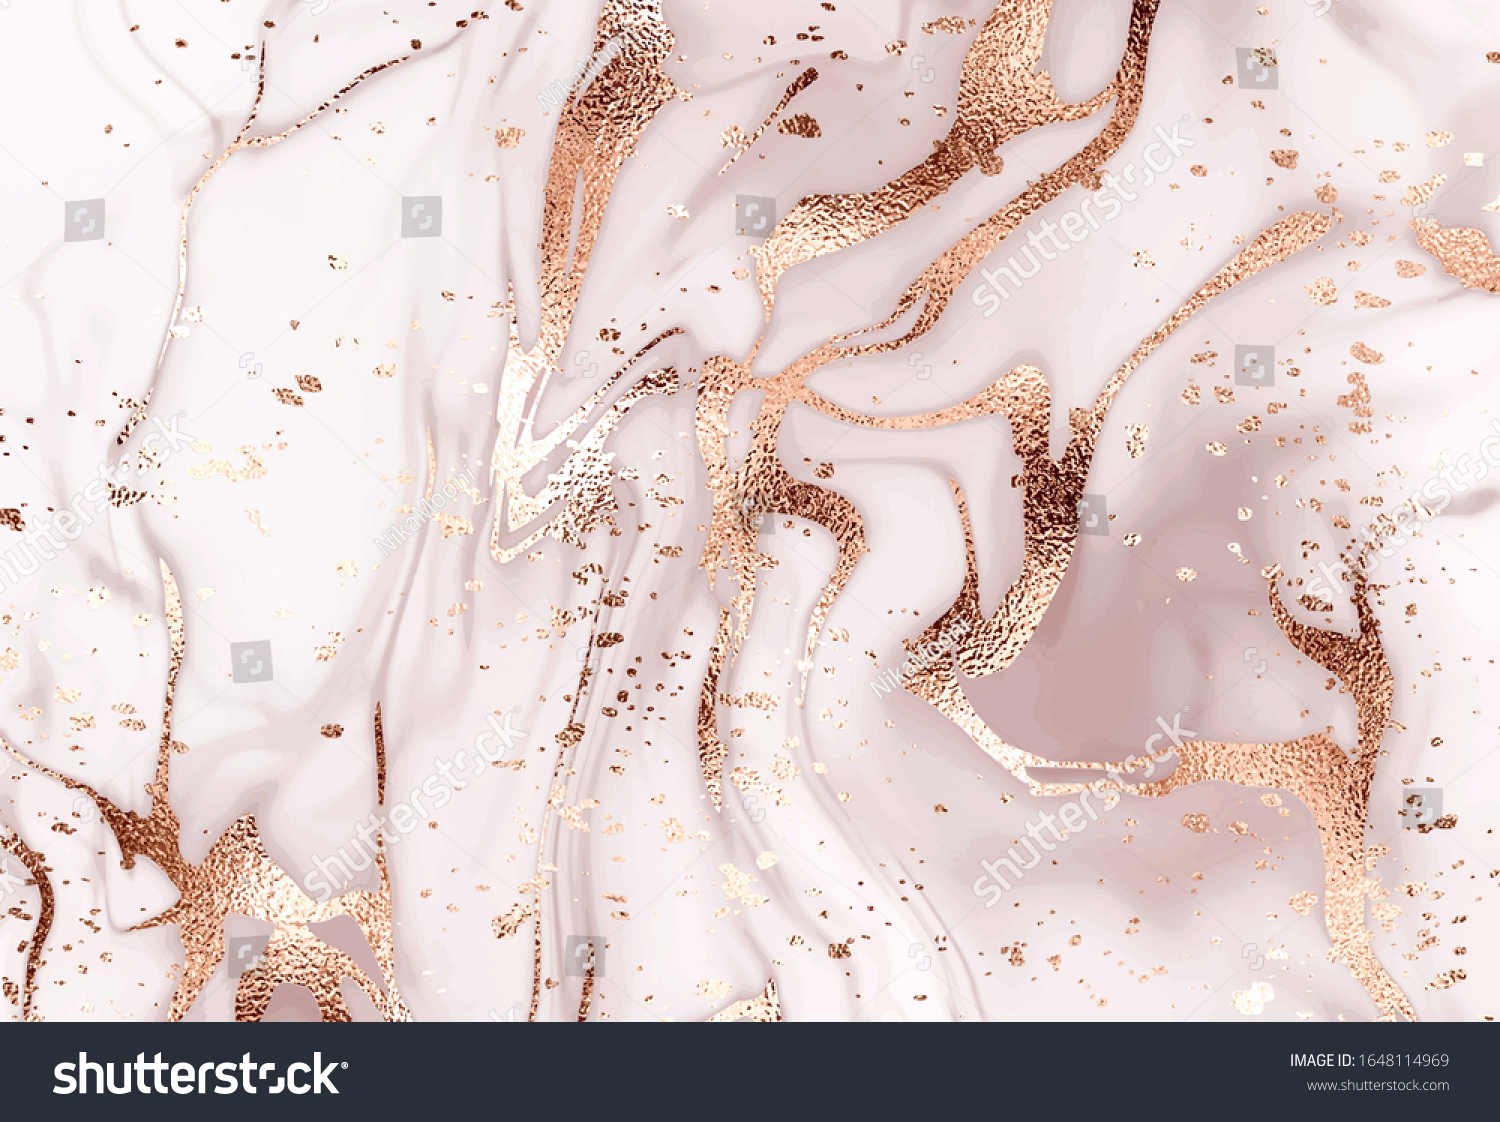 Liquid abstract marble painting background print with rose gold glitter splatter texture.